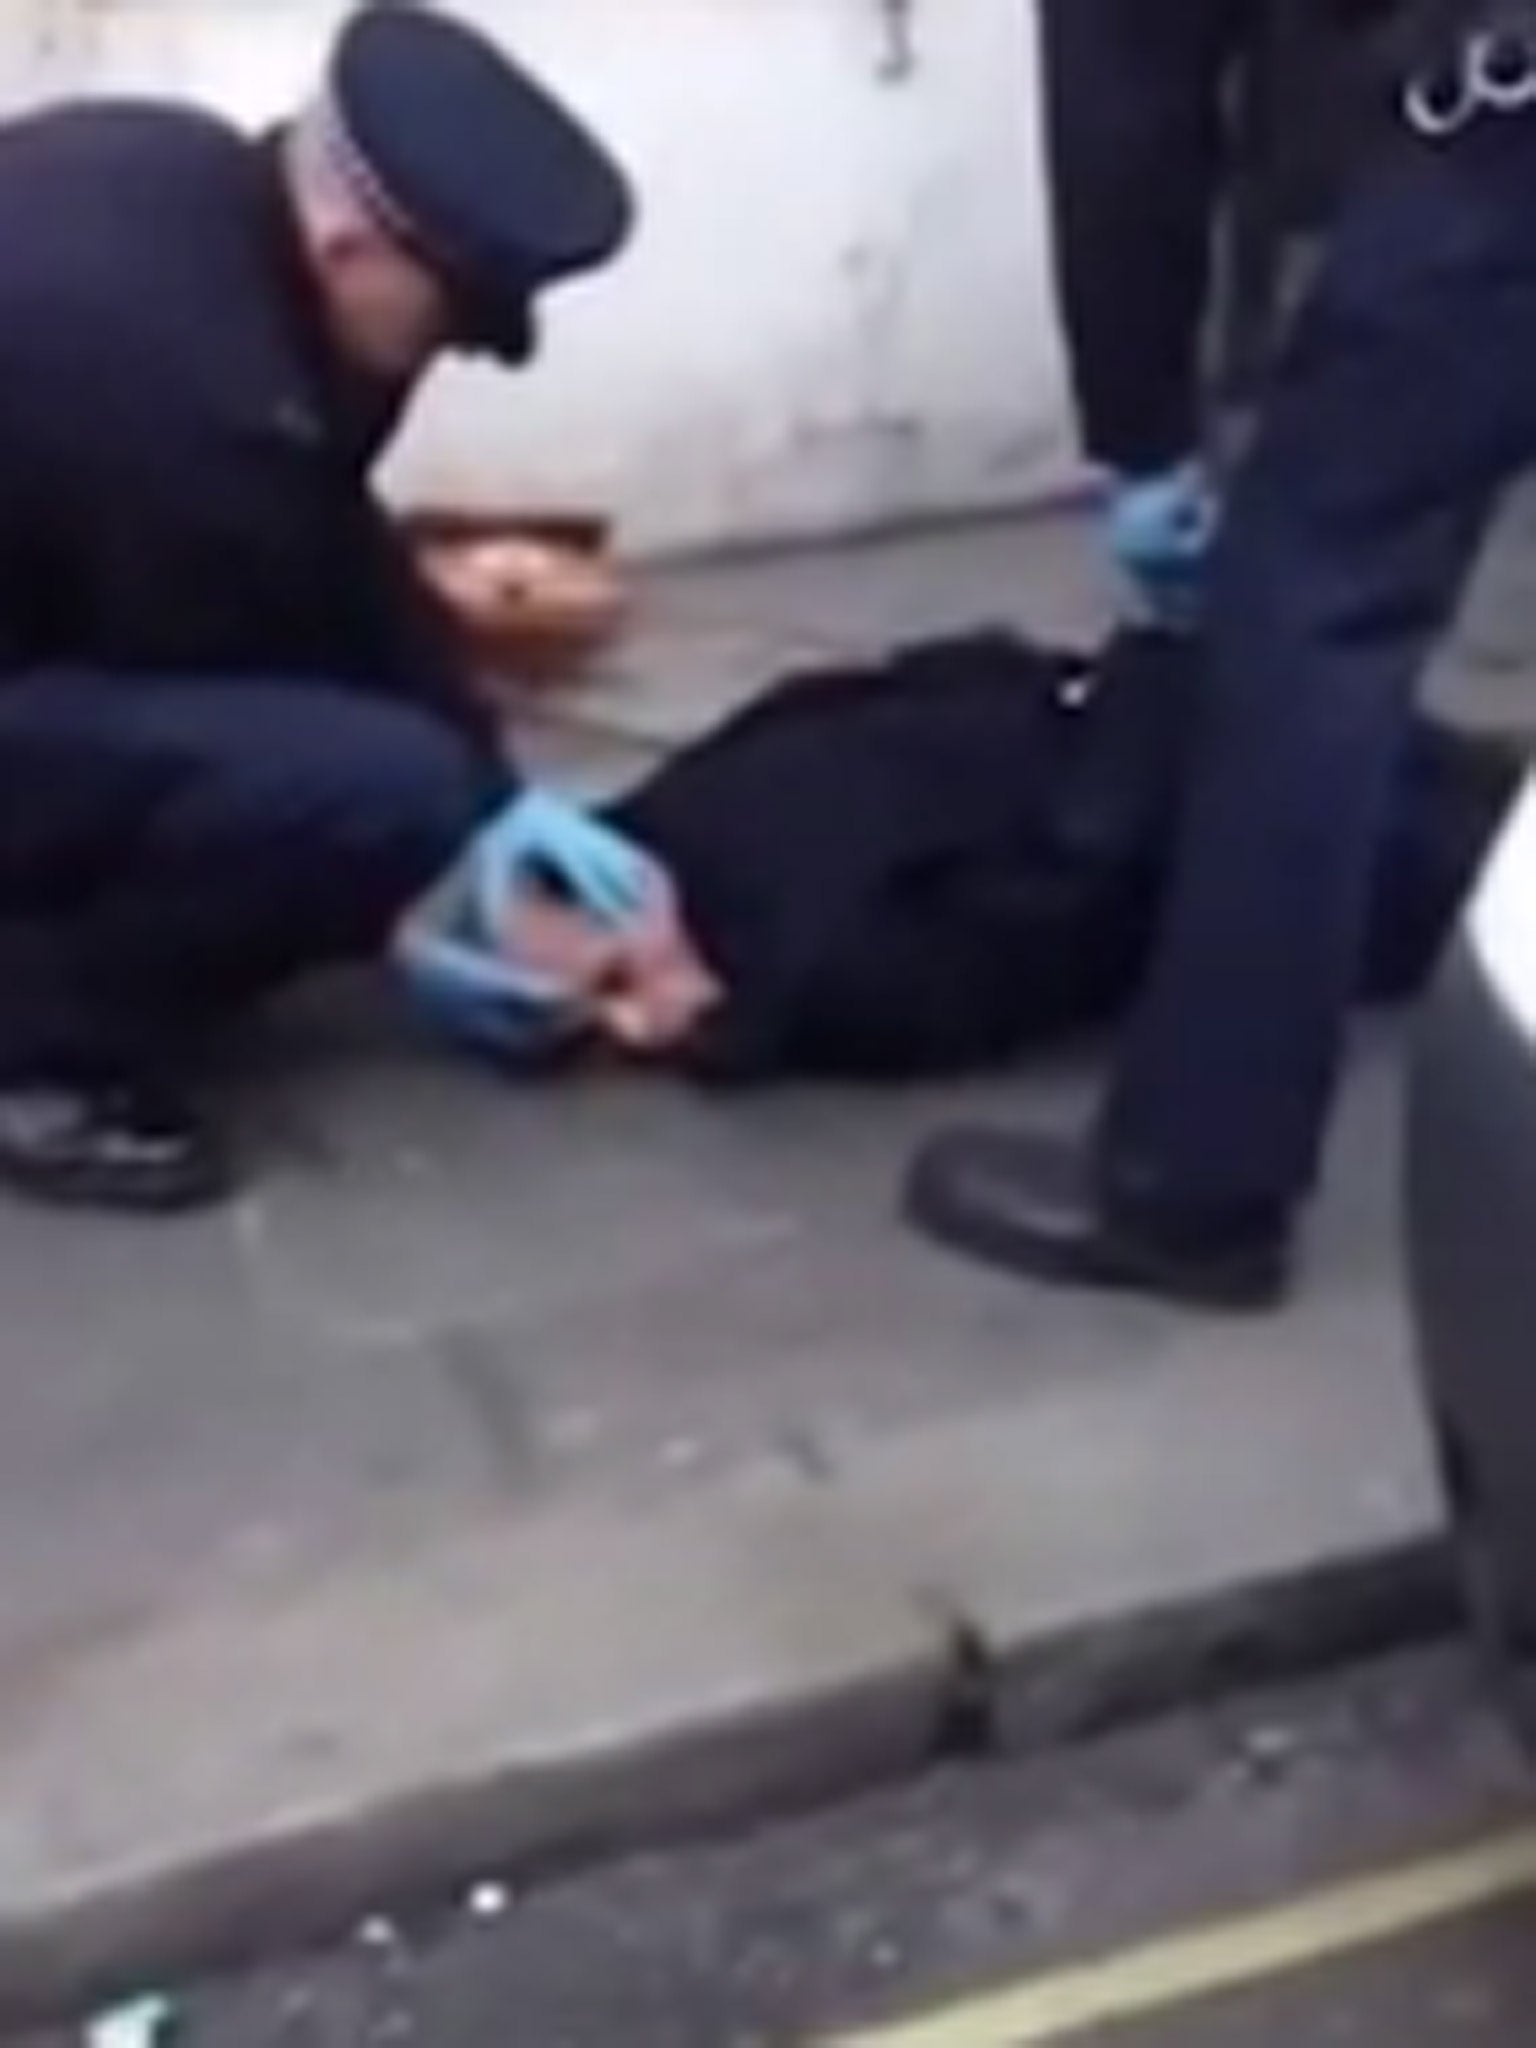 A shot from the video showing the transgendered woman being held down by police